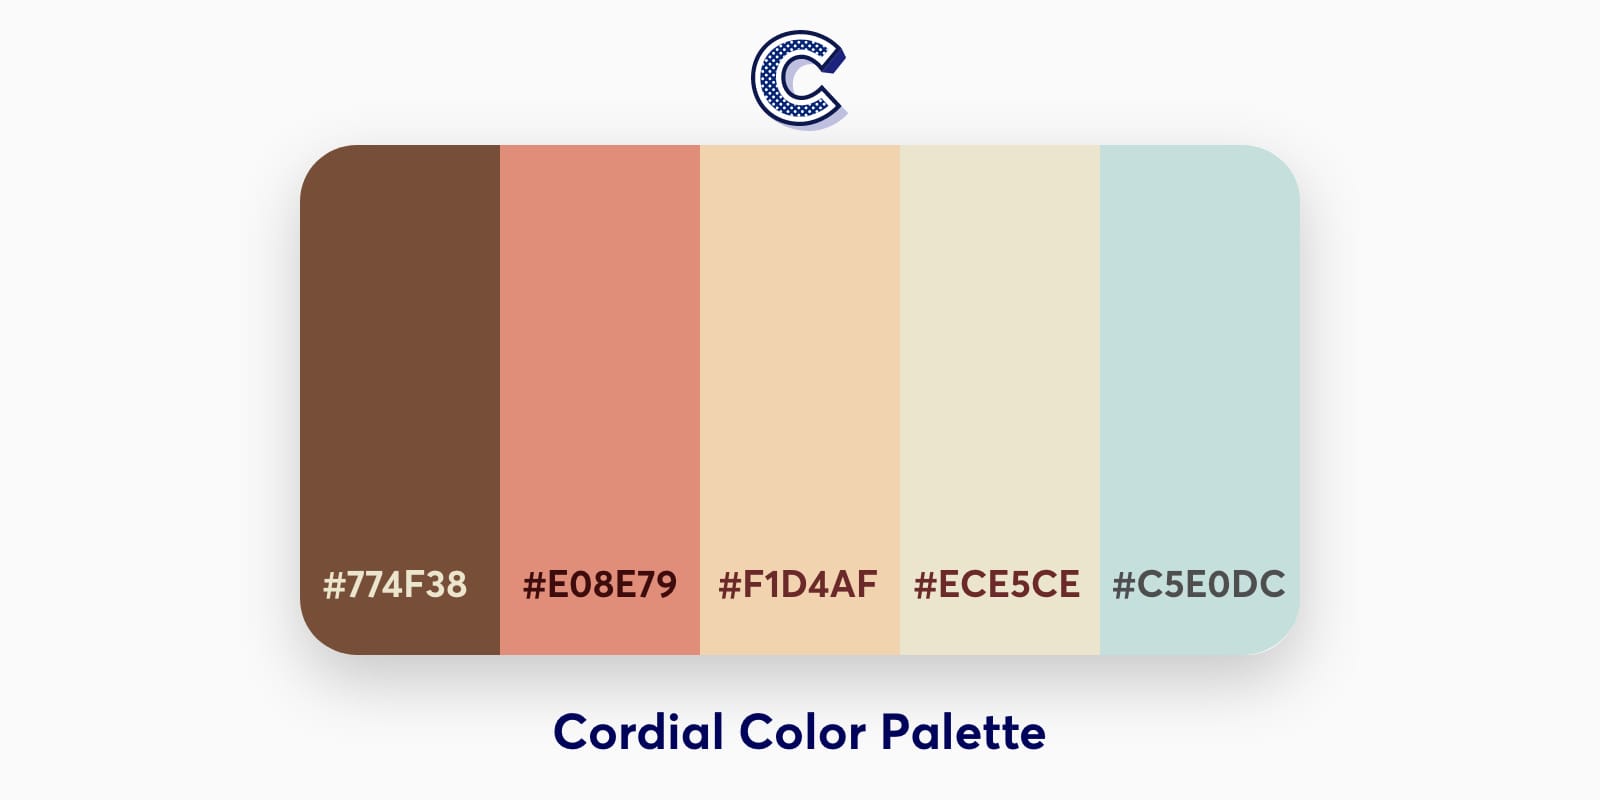 the featured image of cordial color palette